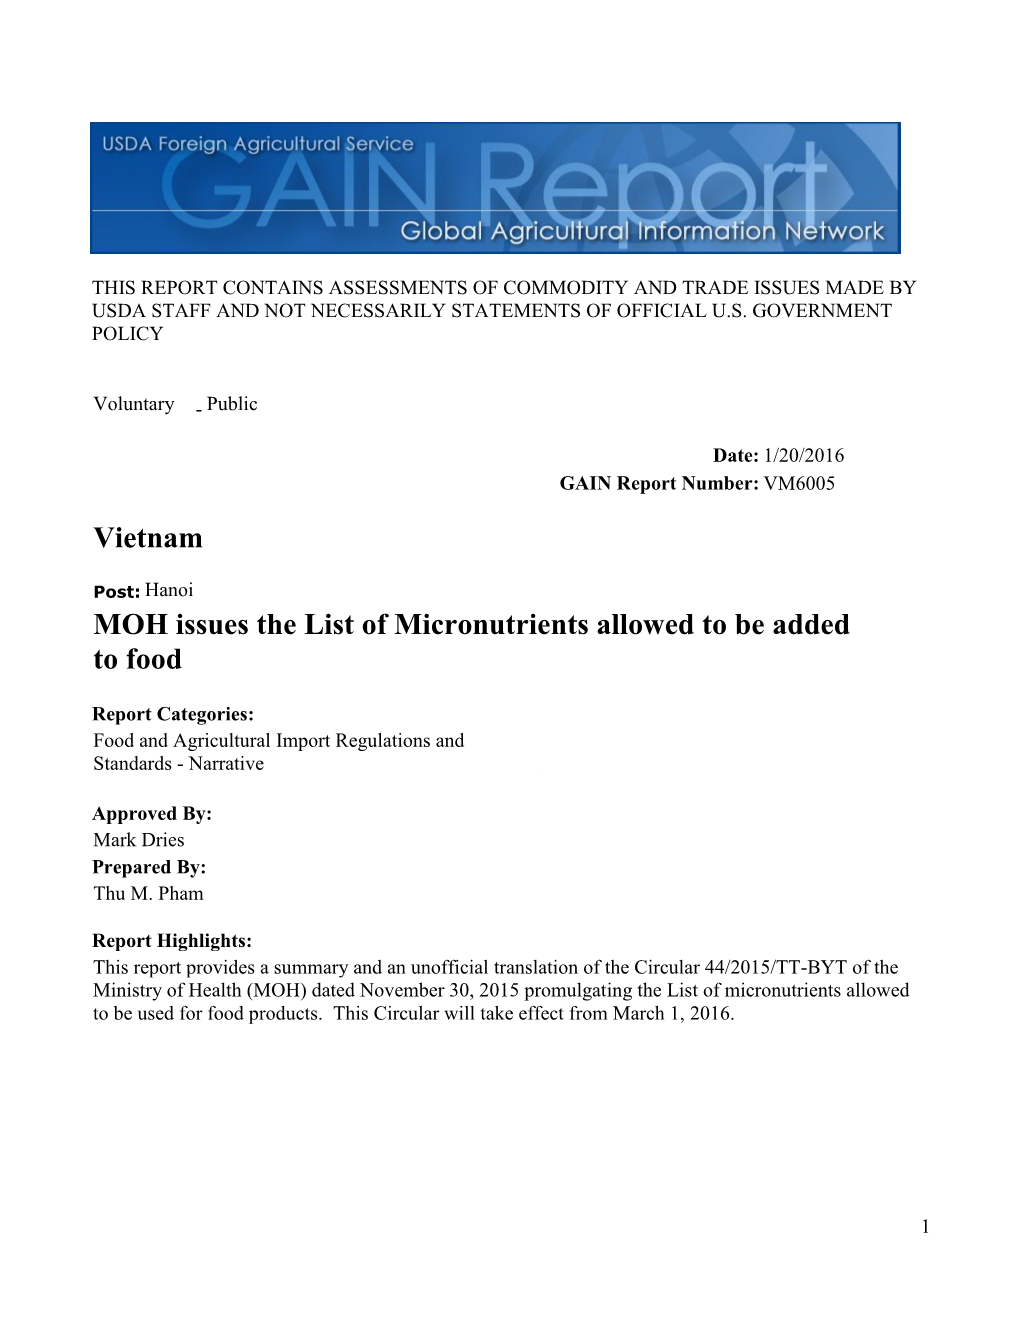 MOH Issues the List of Micronutrients Allowed to Be Added to Food Vietnam